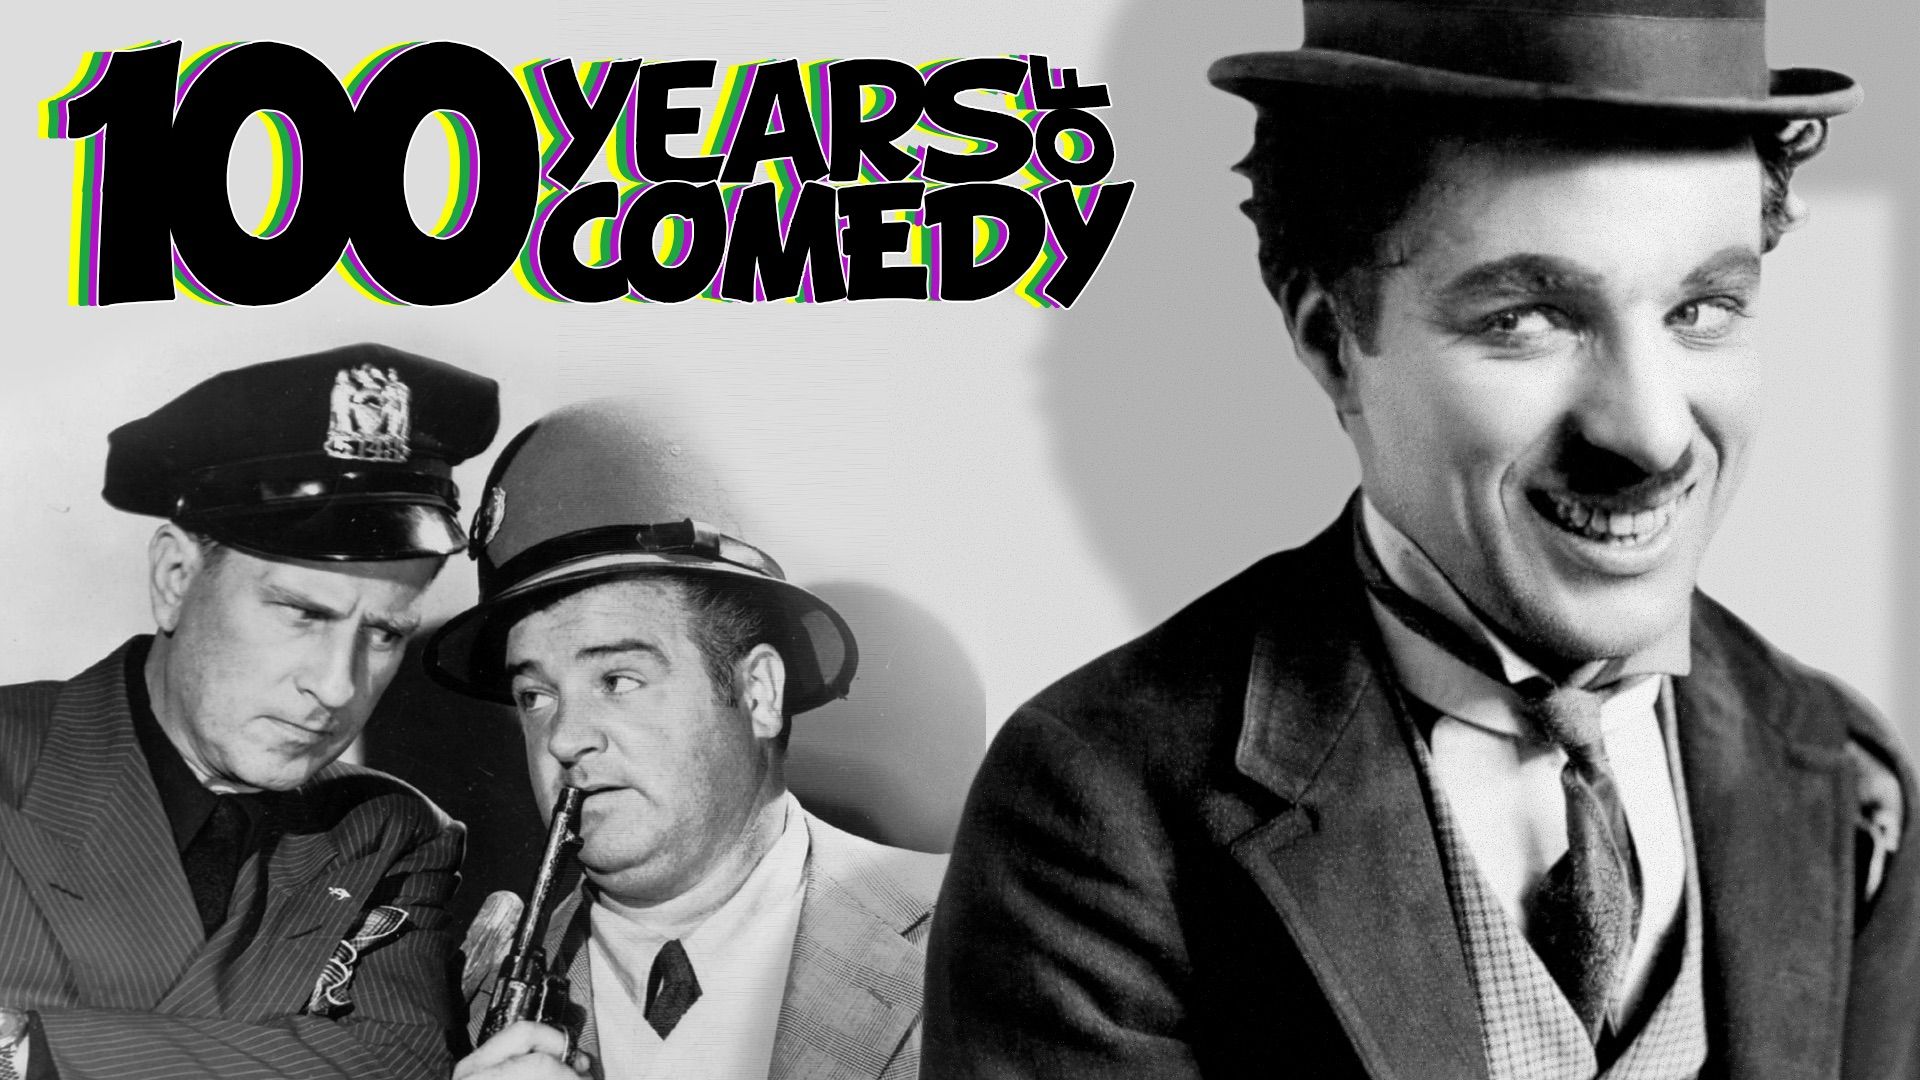 100 Years of Comedy Backdrop